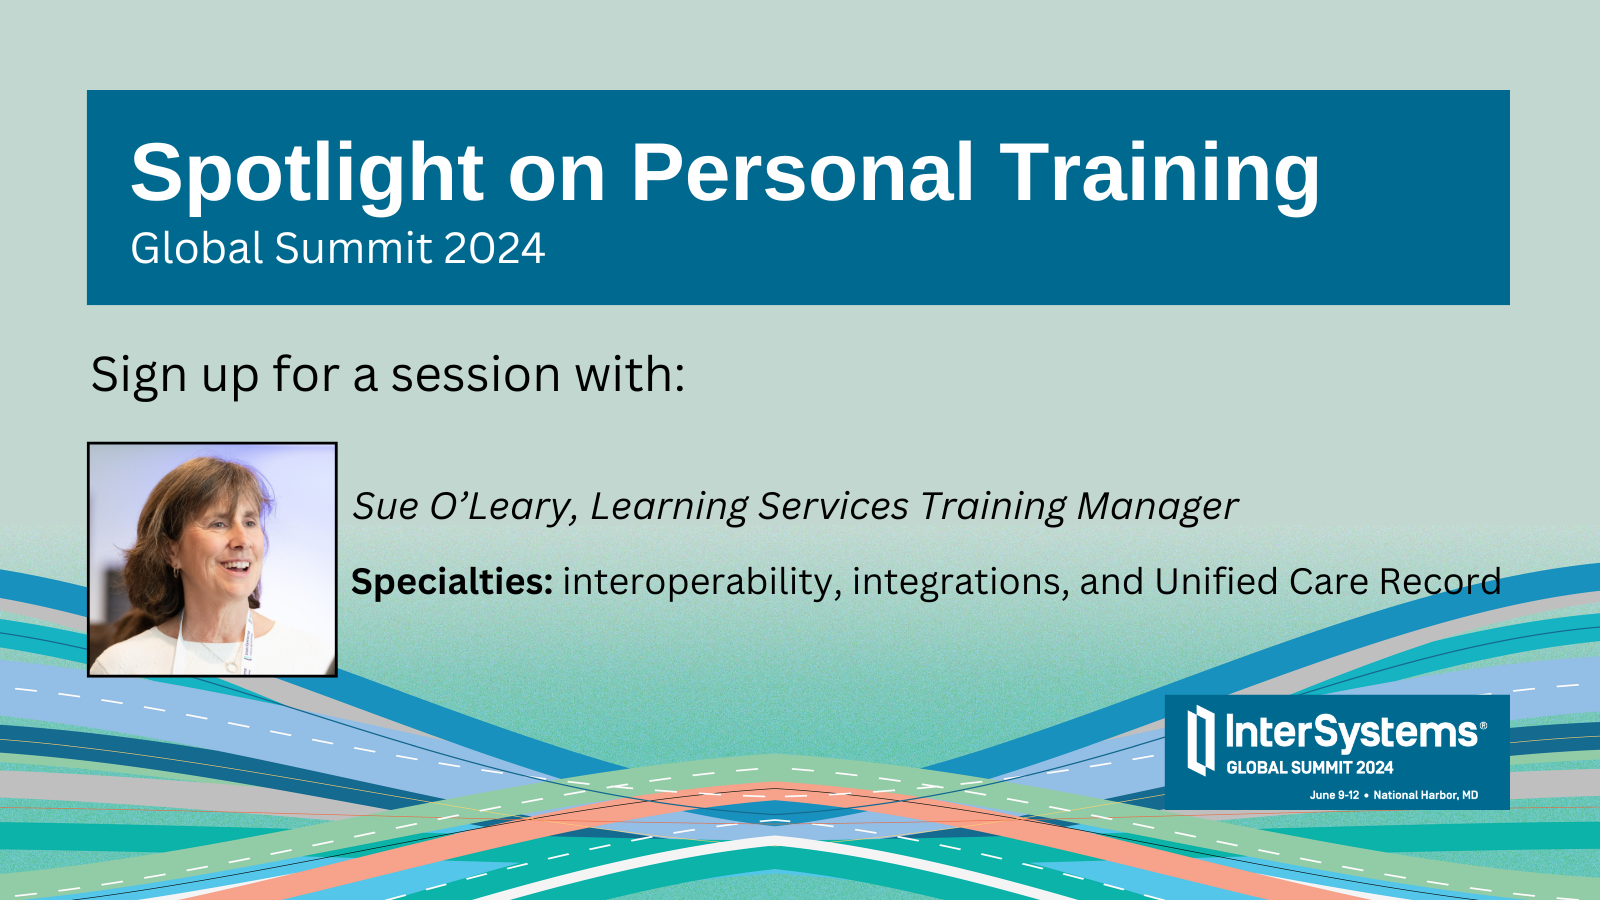 Meet one-on-one with a personal trainer at Global Summit. Discuss interop, integrations, UCR with Sue O'Leary.